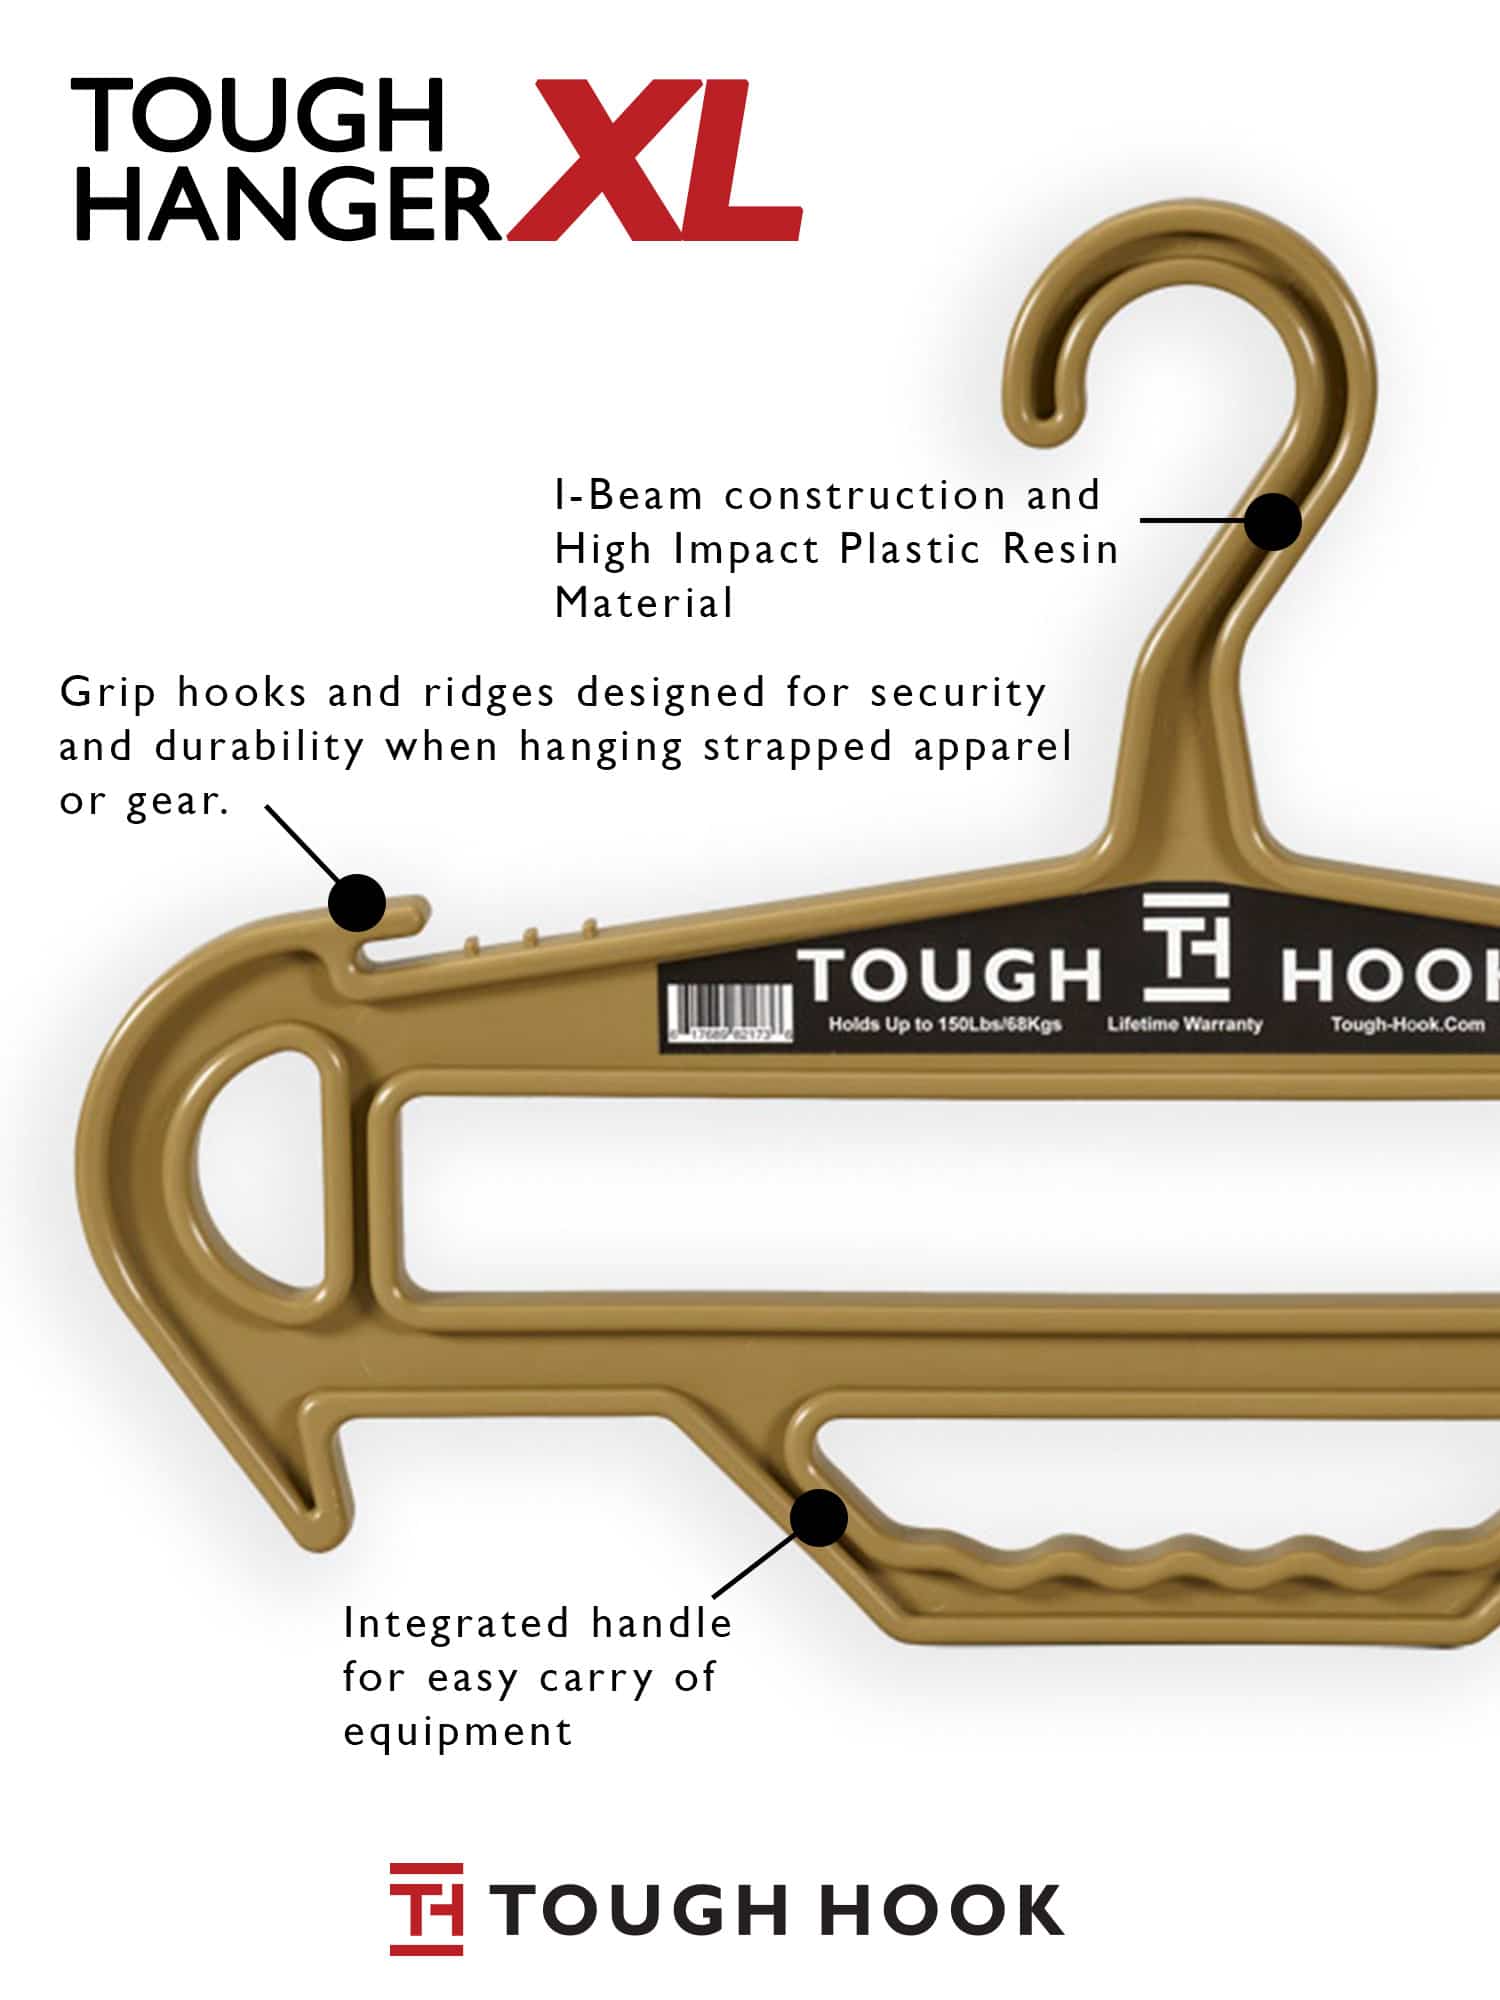 The bigger and tougher Tough Hanger XL by Tough Hook | Tough Hanger XL - 2 Pack Hanger Set